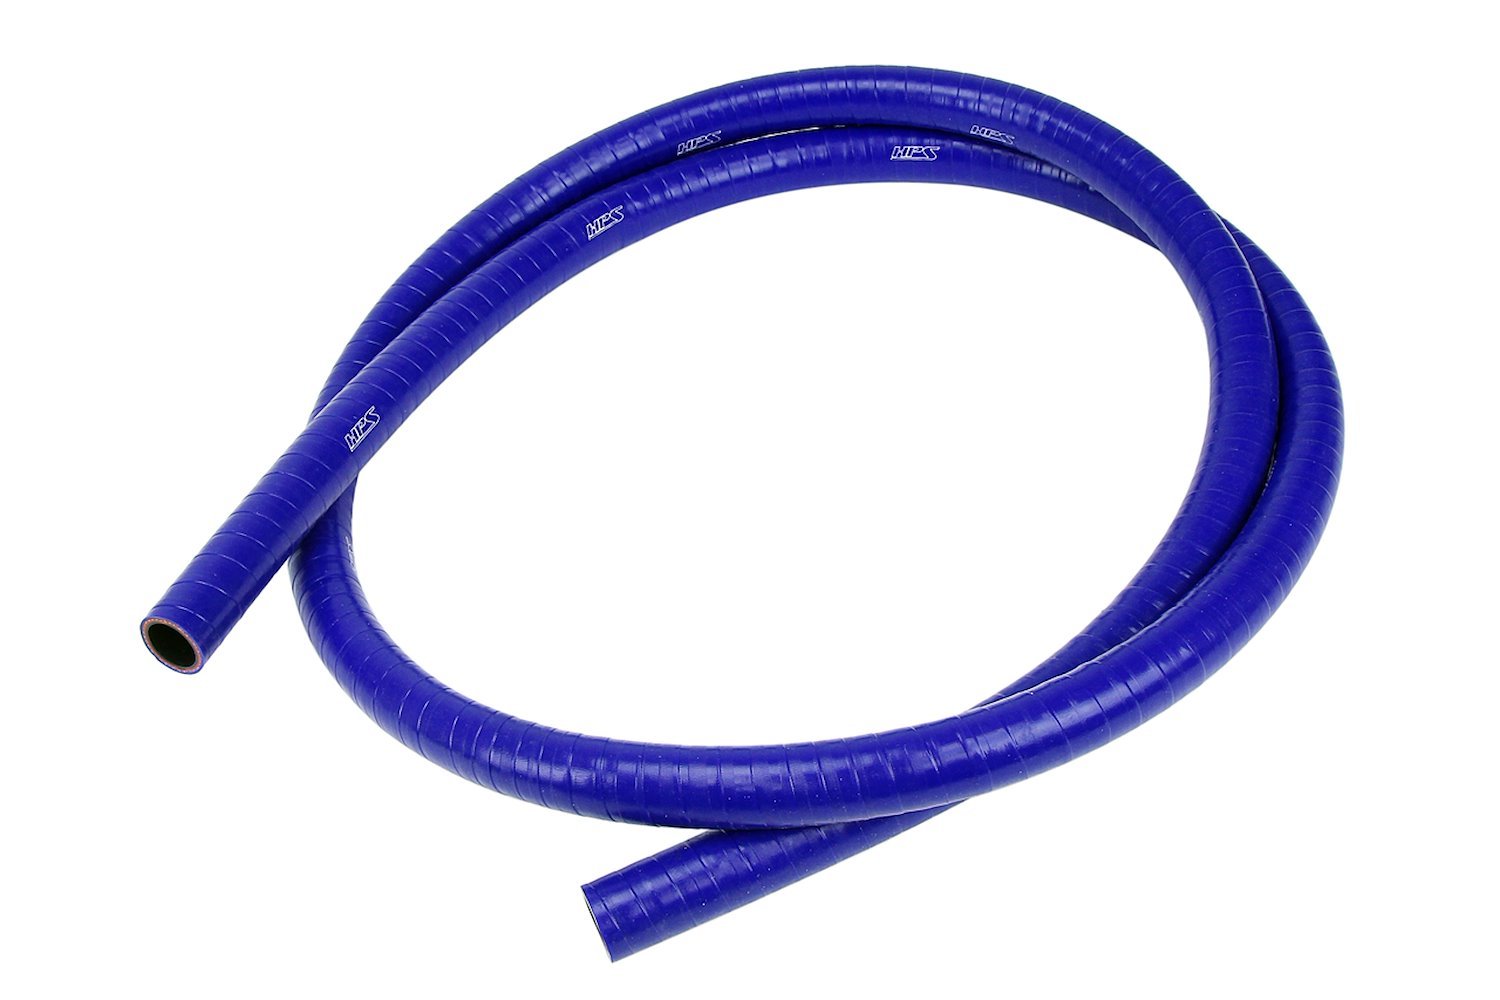 FKM-3F-075-BLUE FKM Silicone Hose, Silicone Oil Resistant Hose, High-Temp 1-Ply Reinforced, 3/4 in. ID, 3 ft. Long, Blue